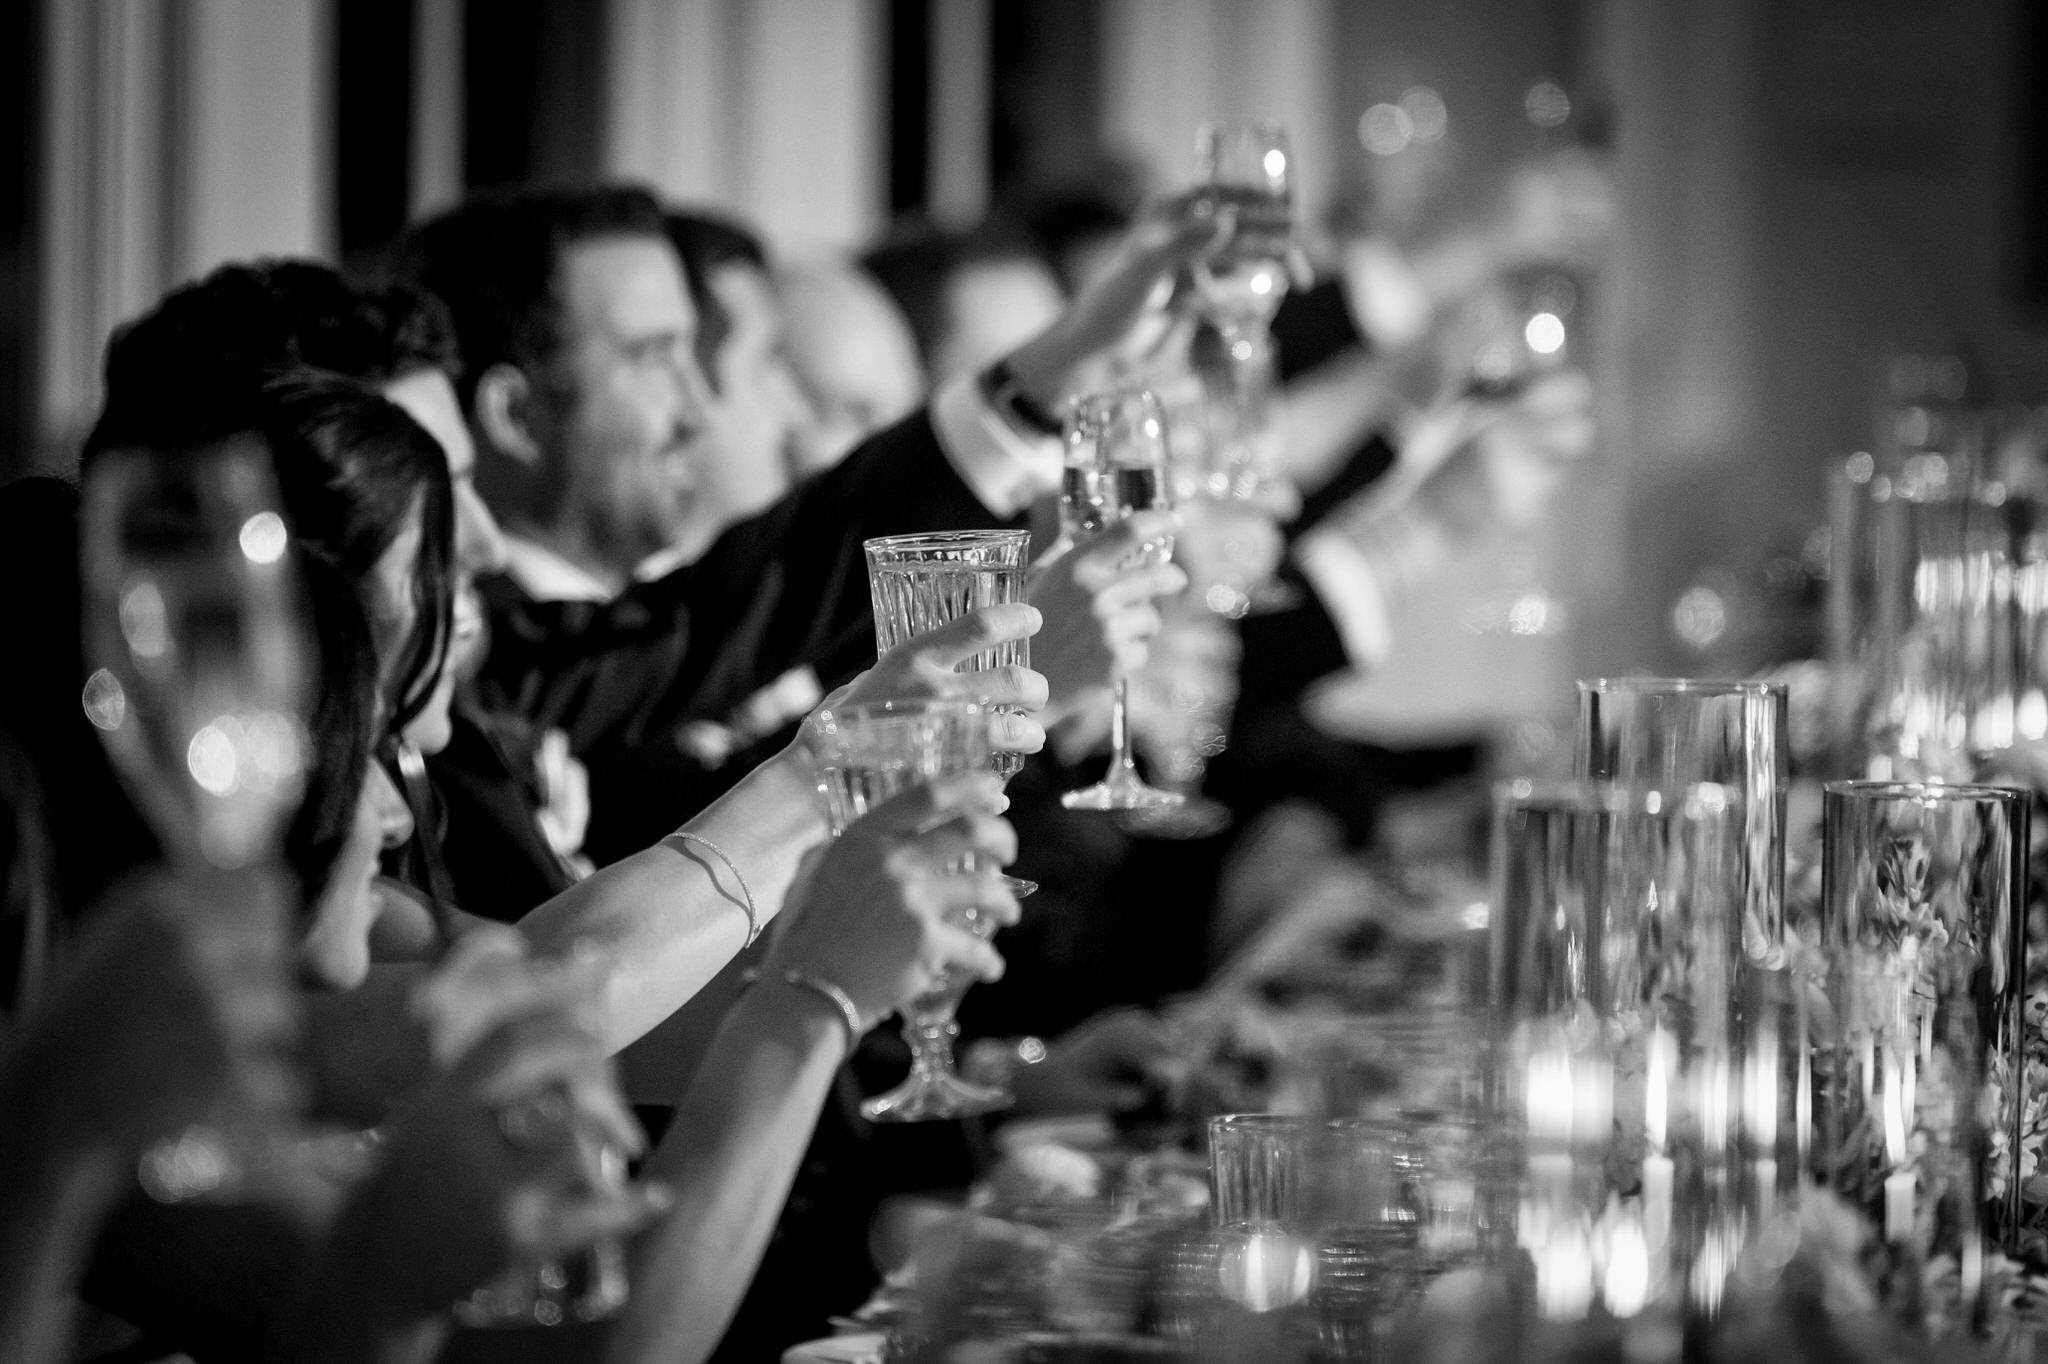 Glasses are raised during a wedding speech.